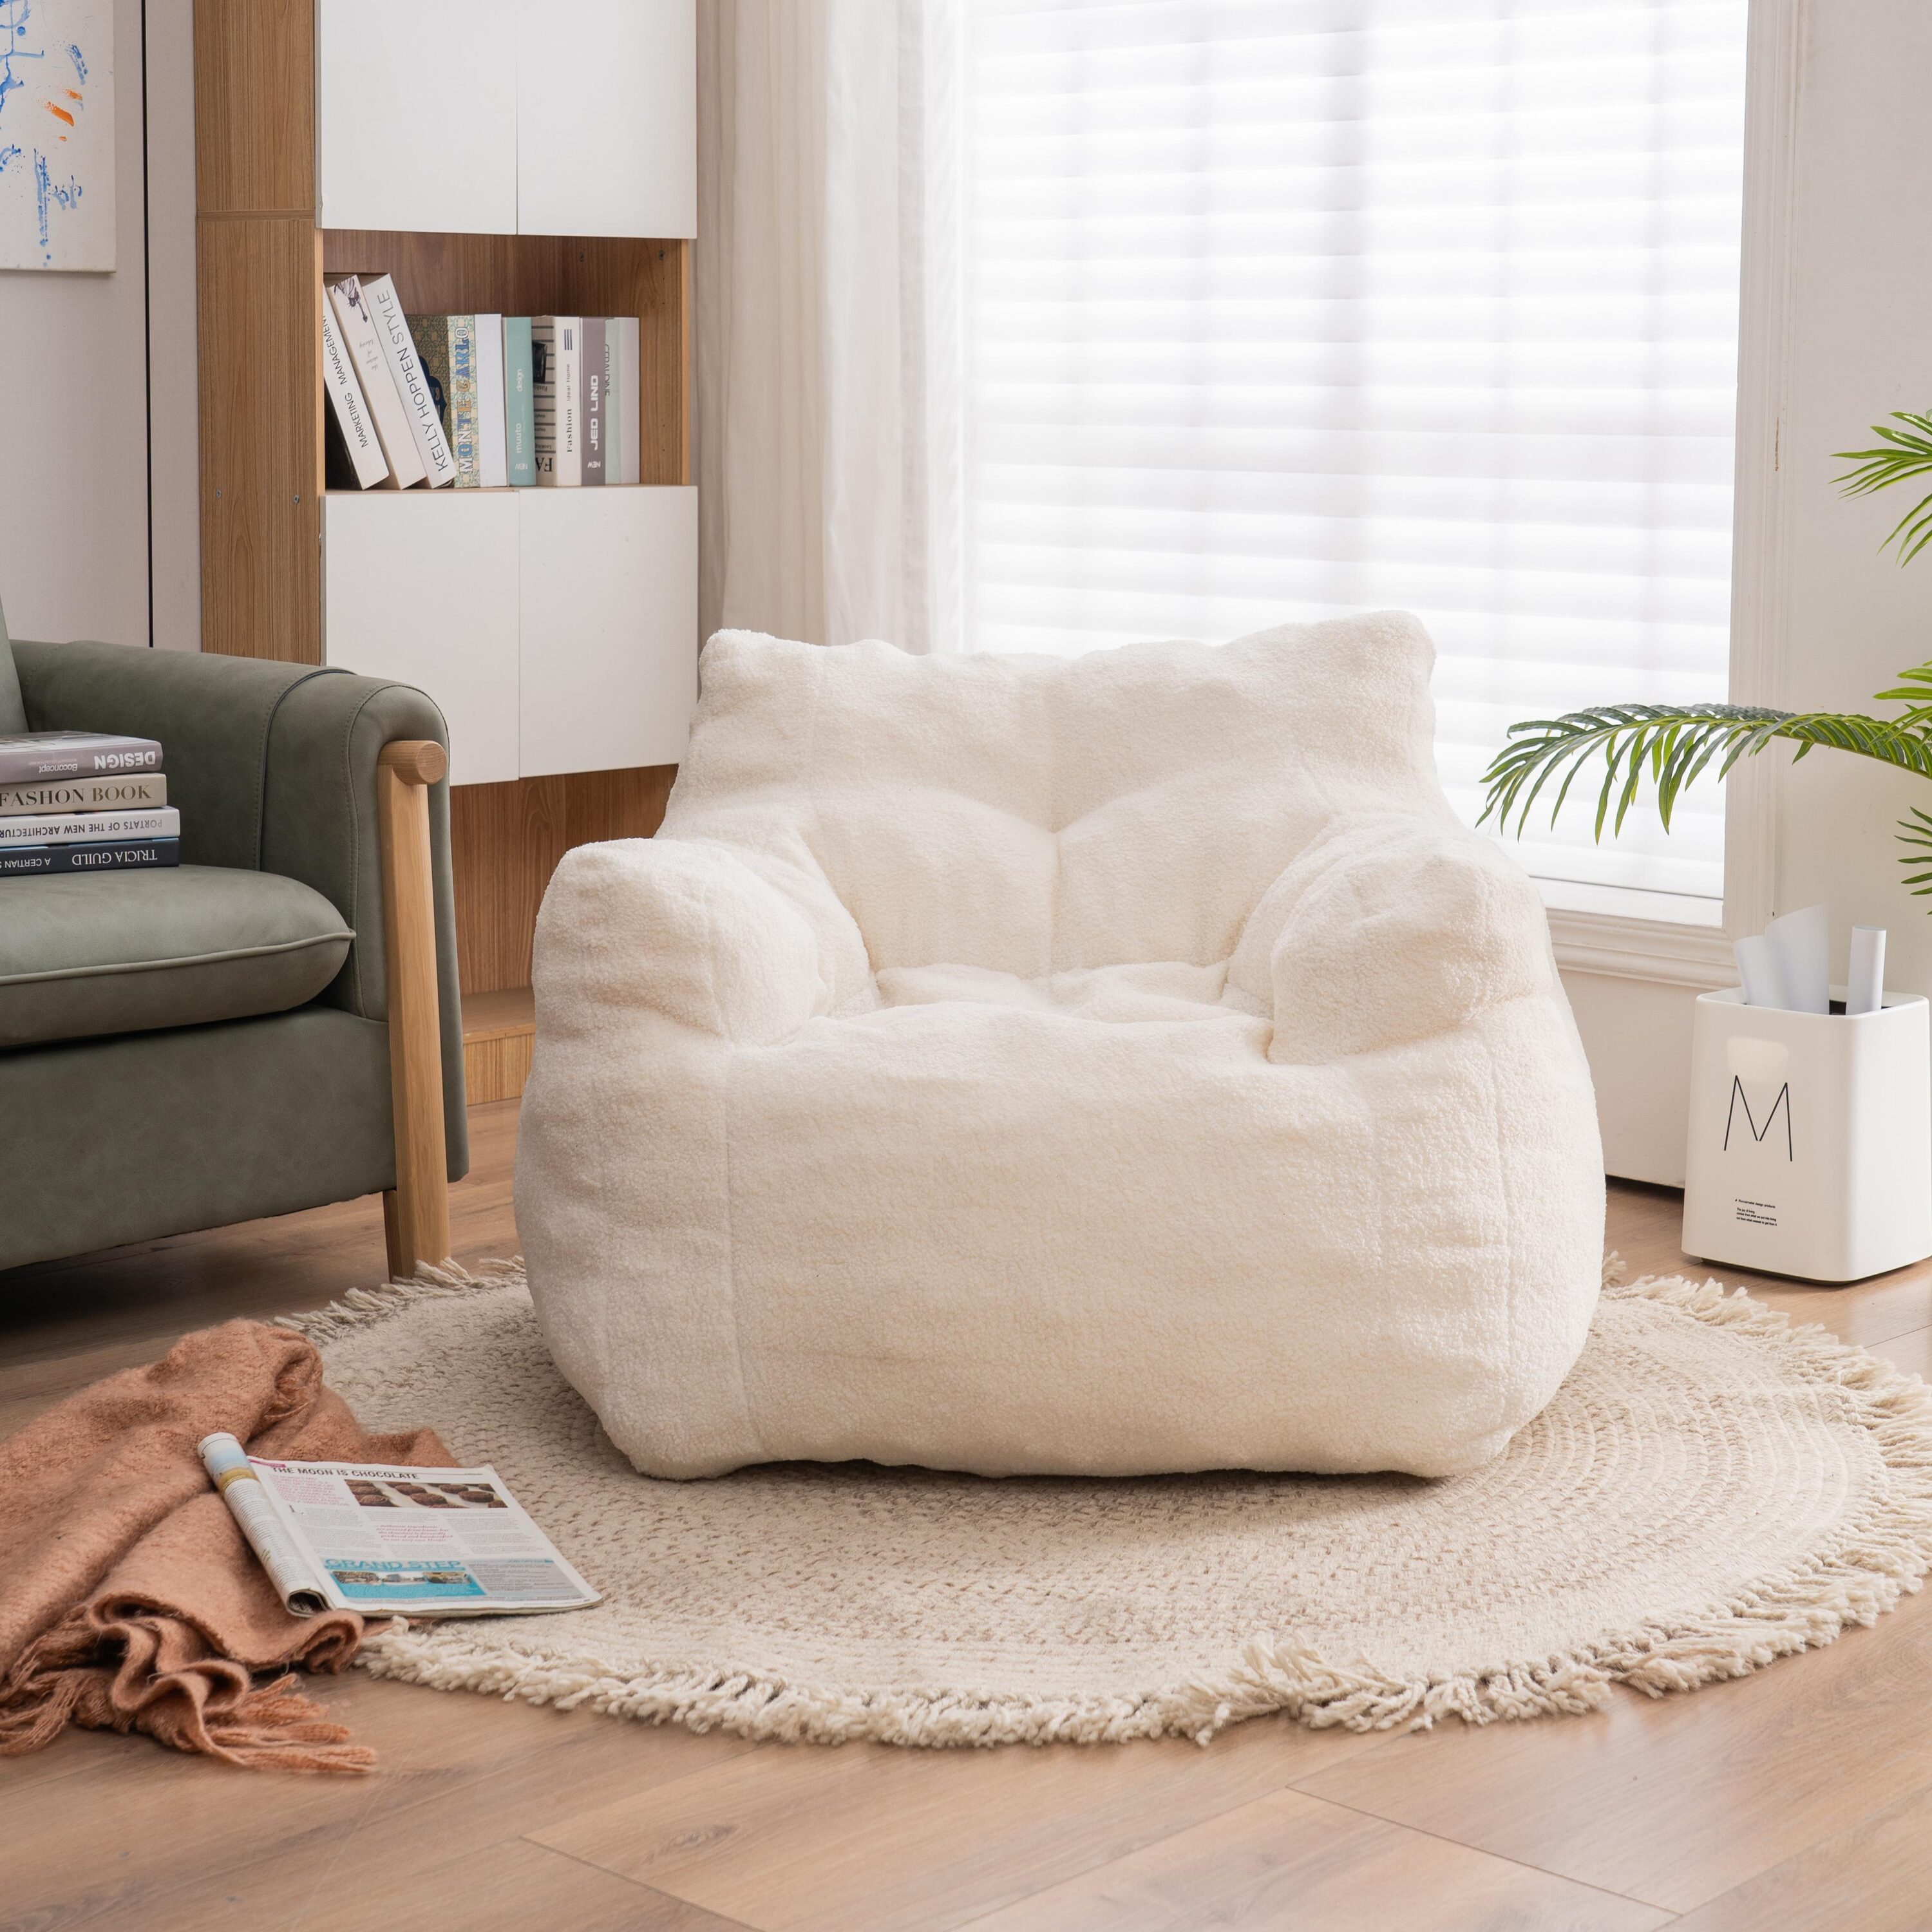 AHIOU Home Chamounix Bean Bag Chair - Ivory Linen Fabric, High-Density Foam Fill, Contemporary Style, Ergonomic Backrest & Armrests - Perfect for